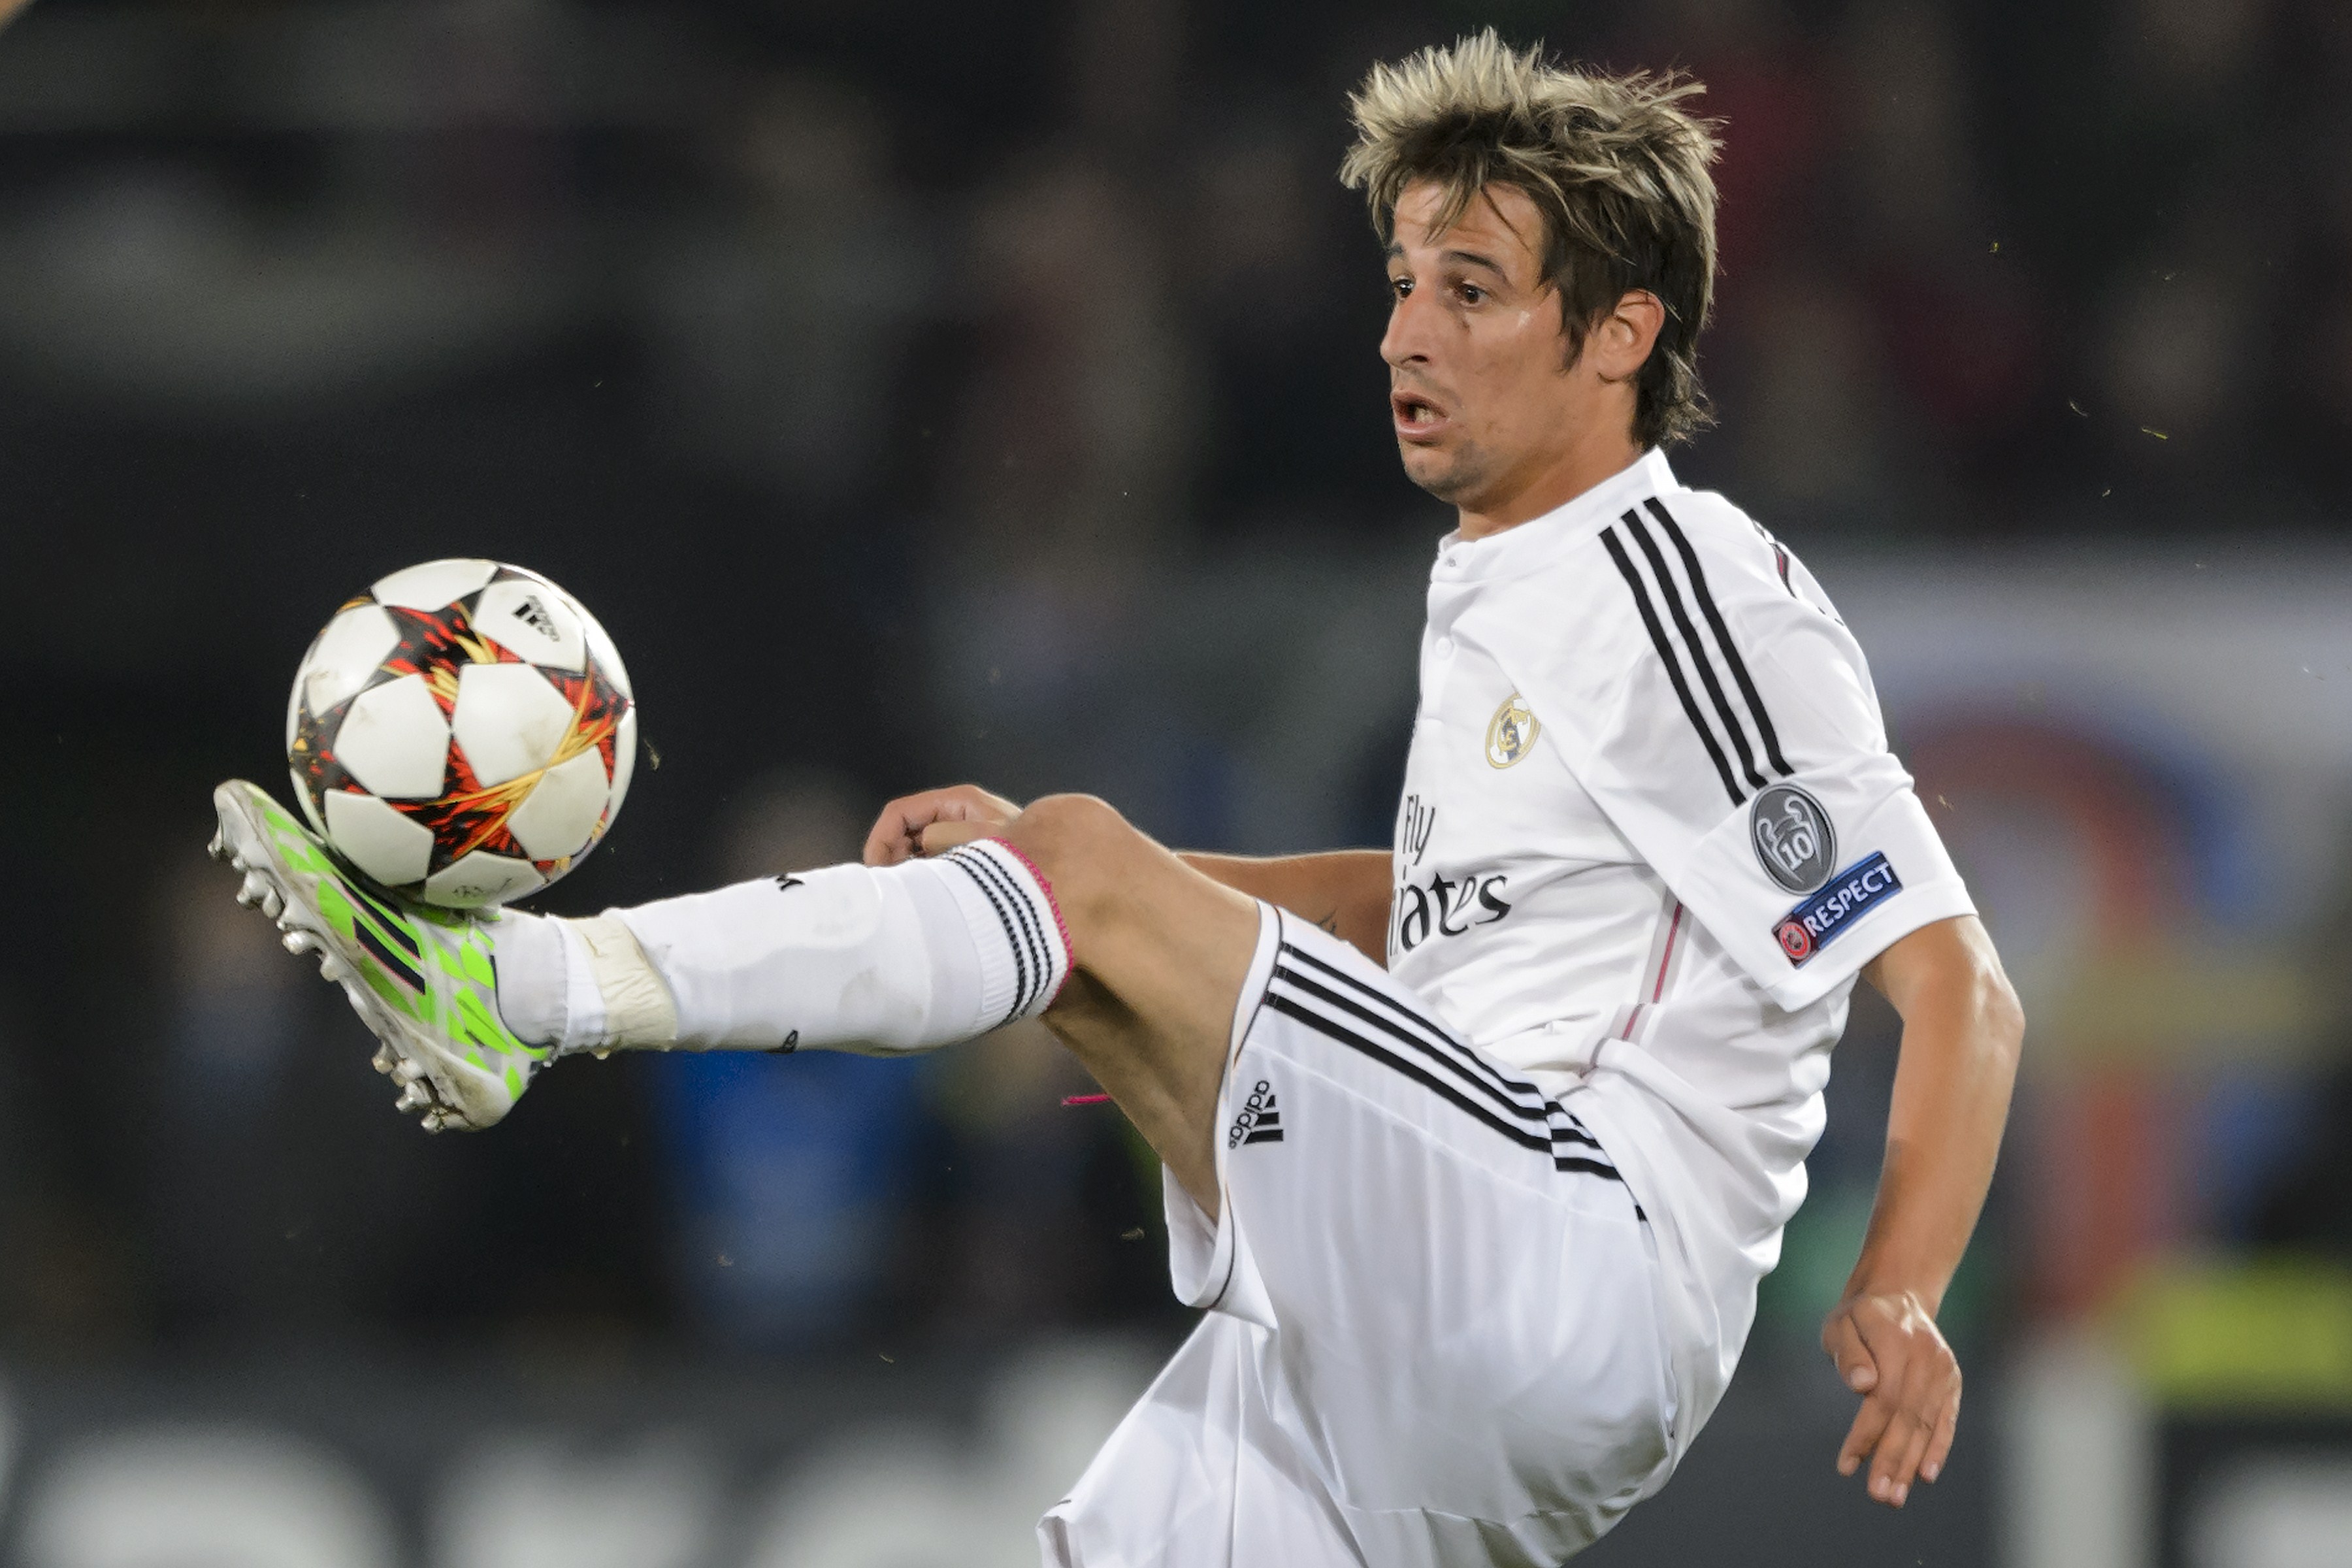 Real Madrid's Portuguese defender Fabio Coentrao controls the ball during the UEFA Champions League Group B football match between FC Basel and Real Madrid in Basel on November 26, 2014. AFP PHOTO / FABRICE COFFRINI (Photo credit should read FABRICE COFFRINI/AFP/Getty Images)